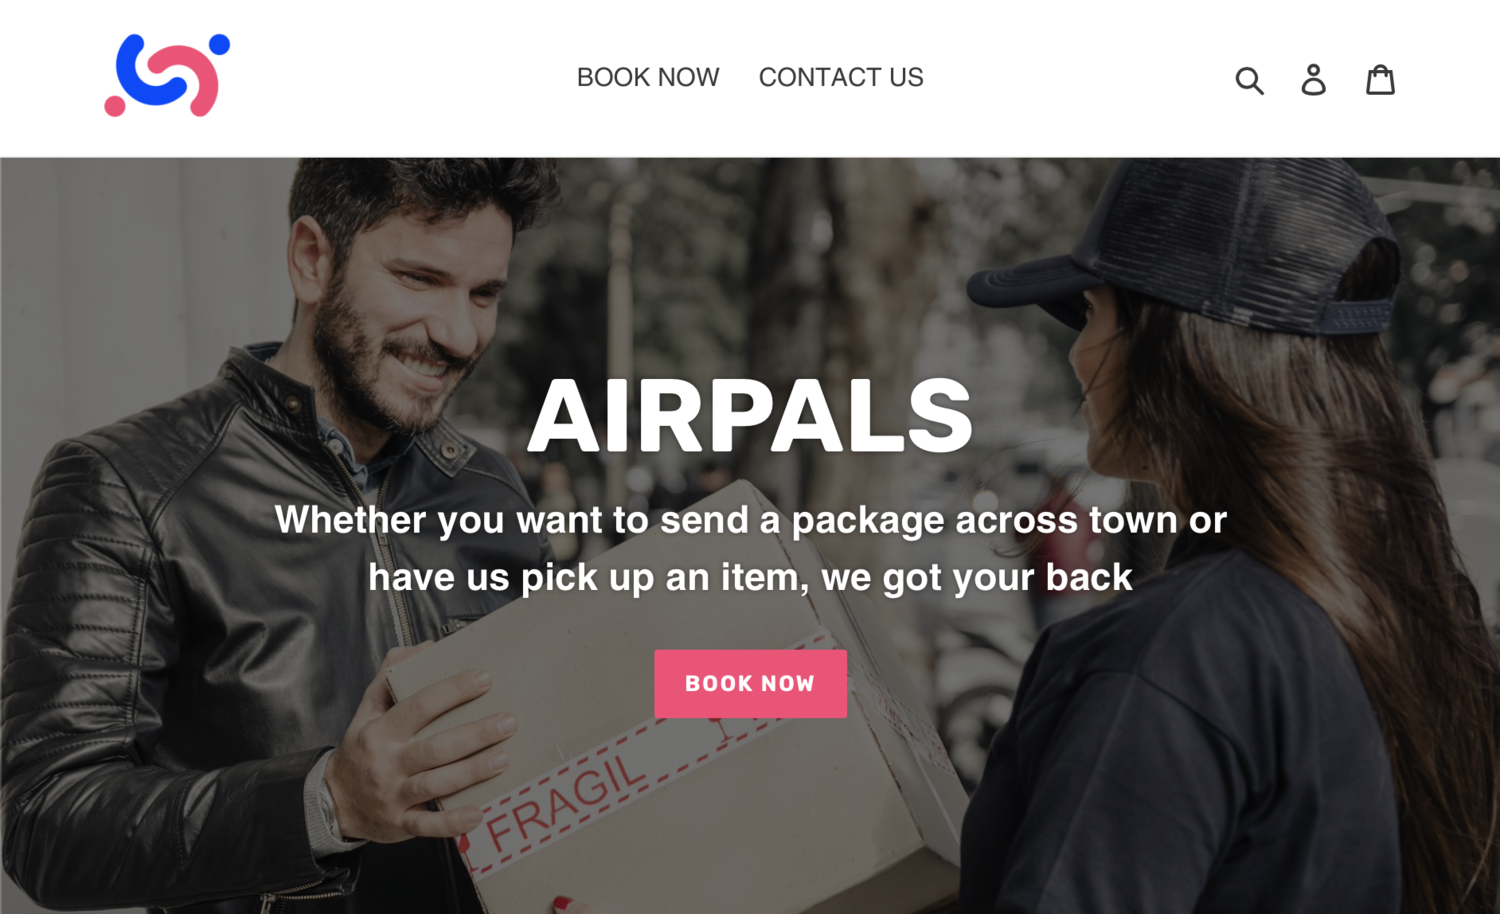 Airpals is a NYC-based courier service